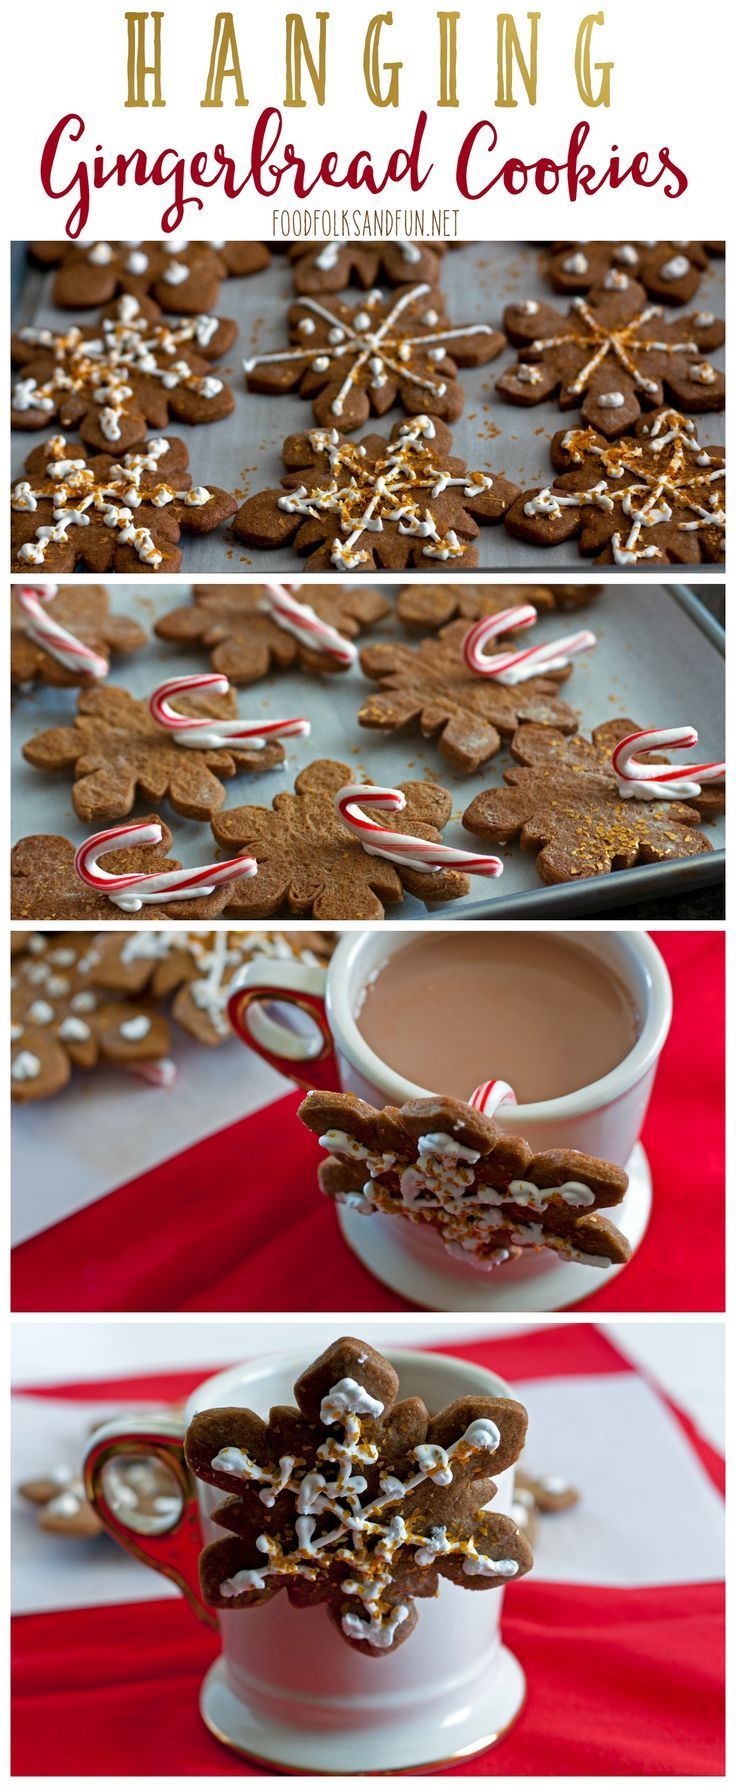 This Hanging Gingerbread Cookie recipe is a unique spin on the classic. Just add a